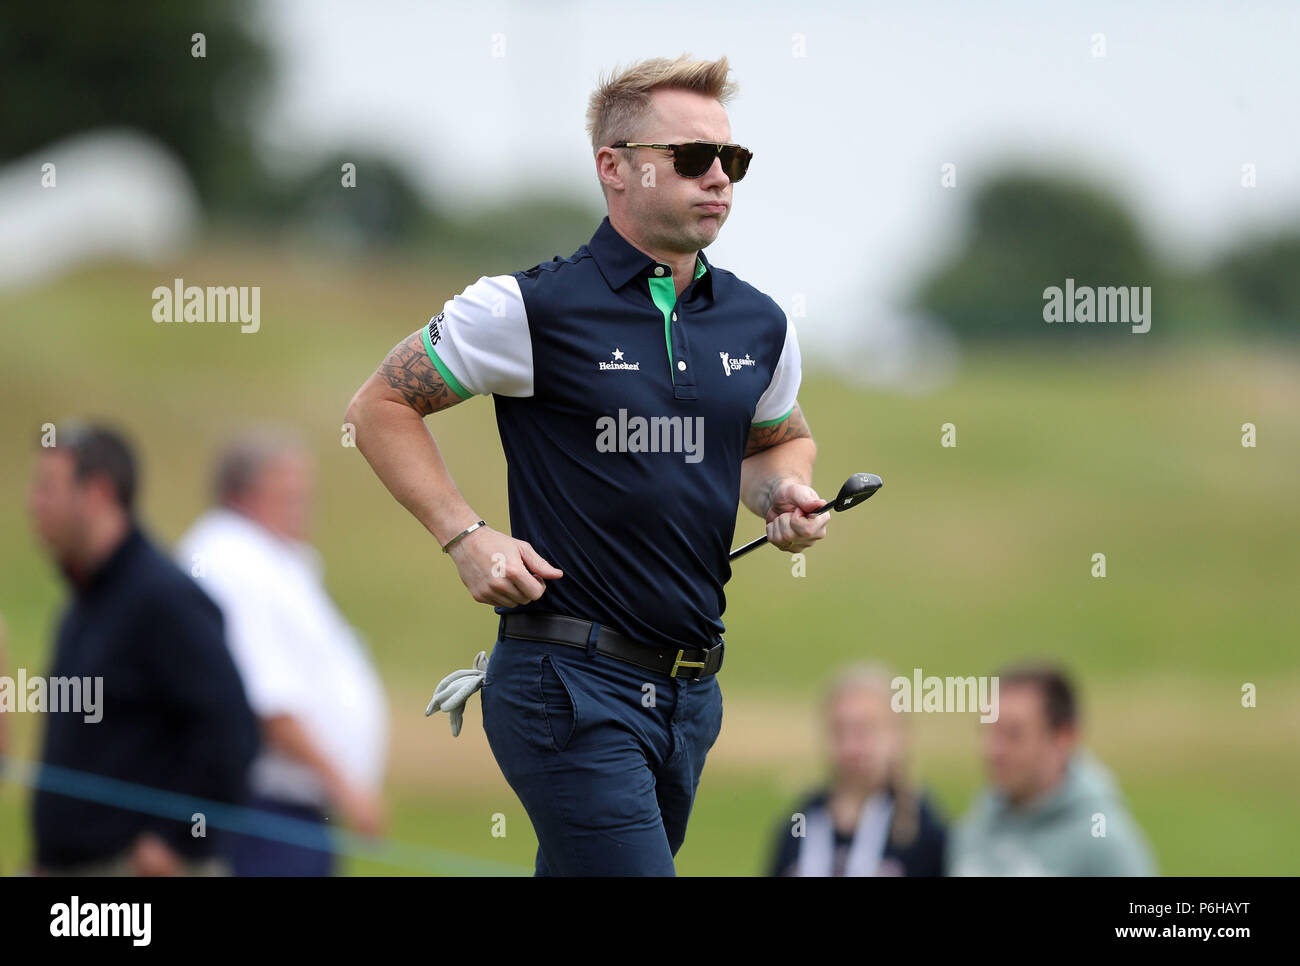 RETRANSMITTED CORRECTING NAME OF TEAM COUNTRY. Ireland's Ronan Keating during the Celebrity Cup charity golf tournament at The Celtic Manor Resort in Newport. Stock Photo